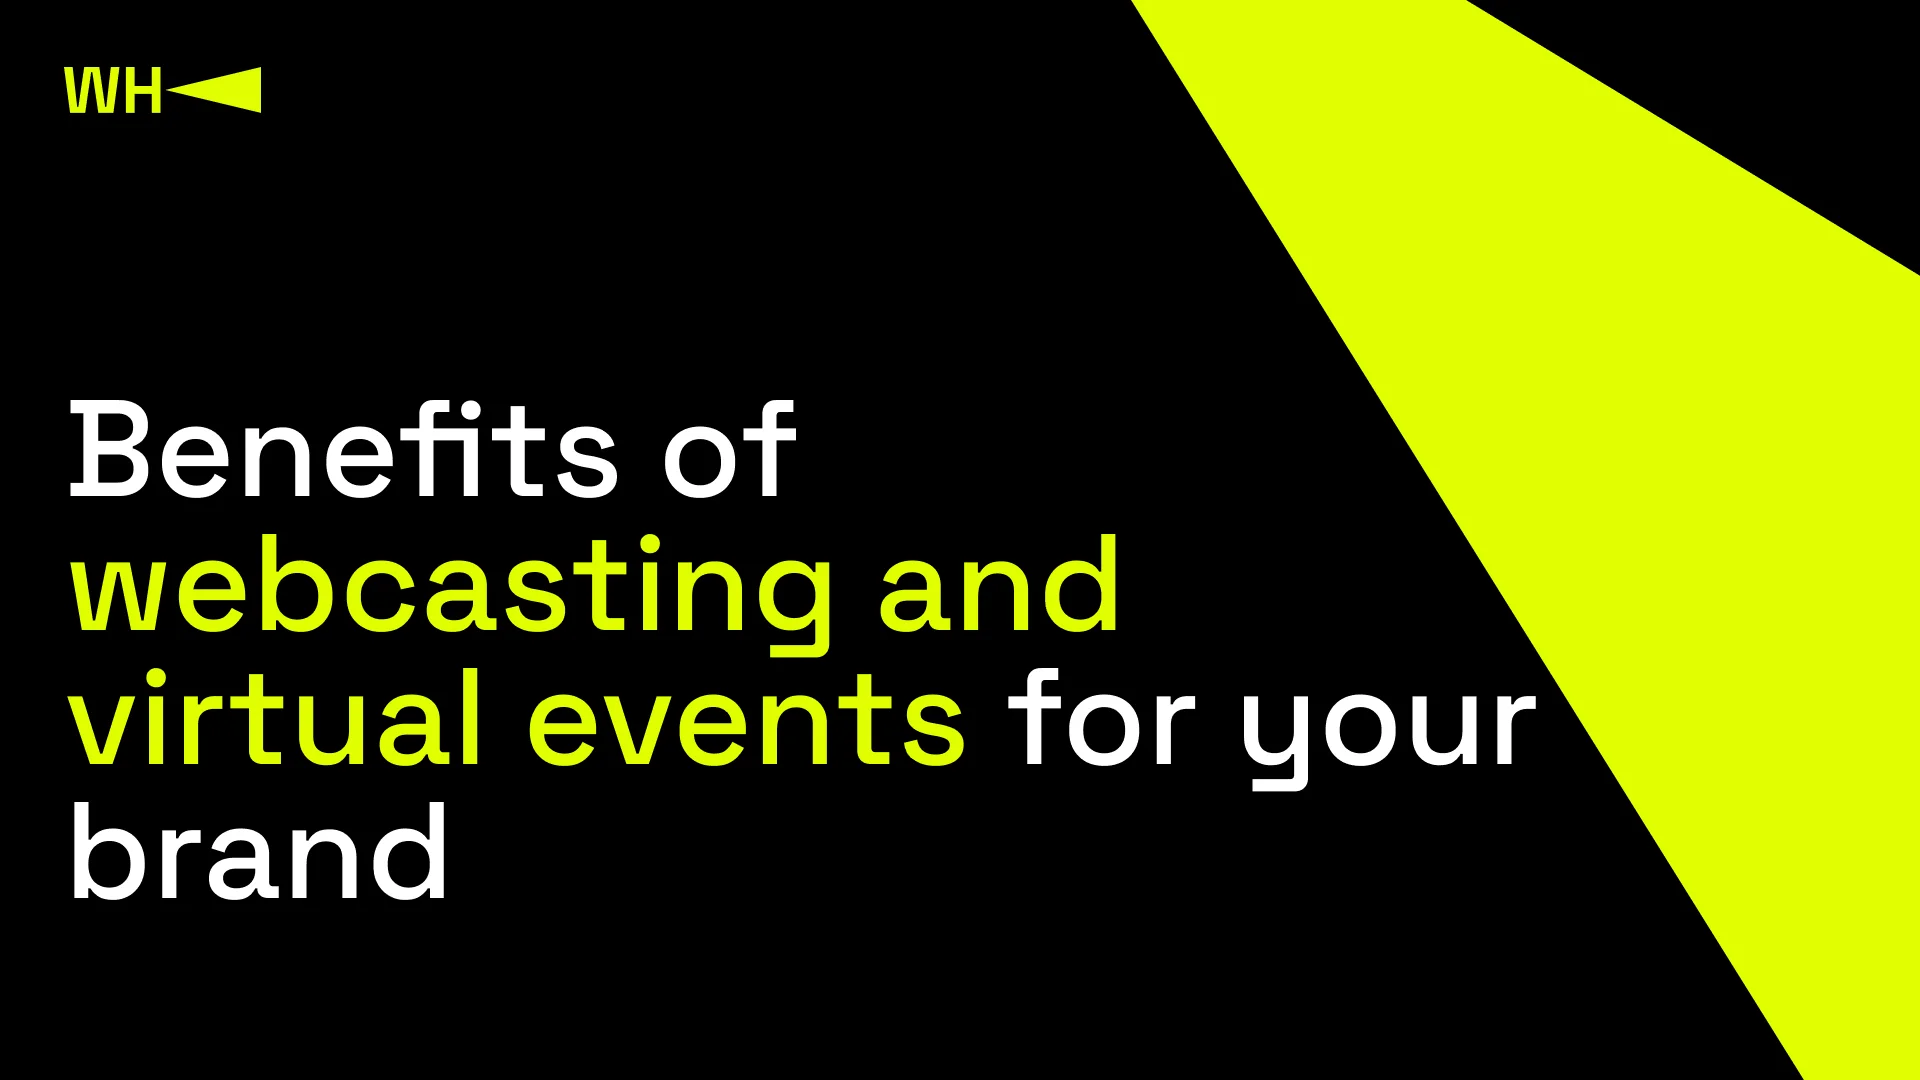 Benefits of webcasting and virtual events for your brand. Credits: WePlay Holding